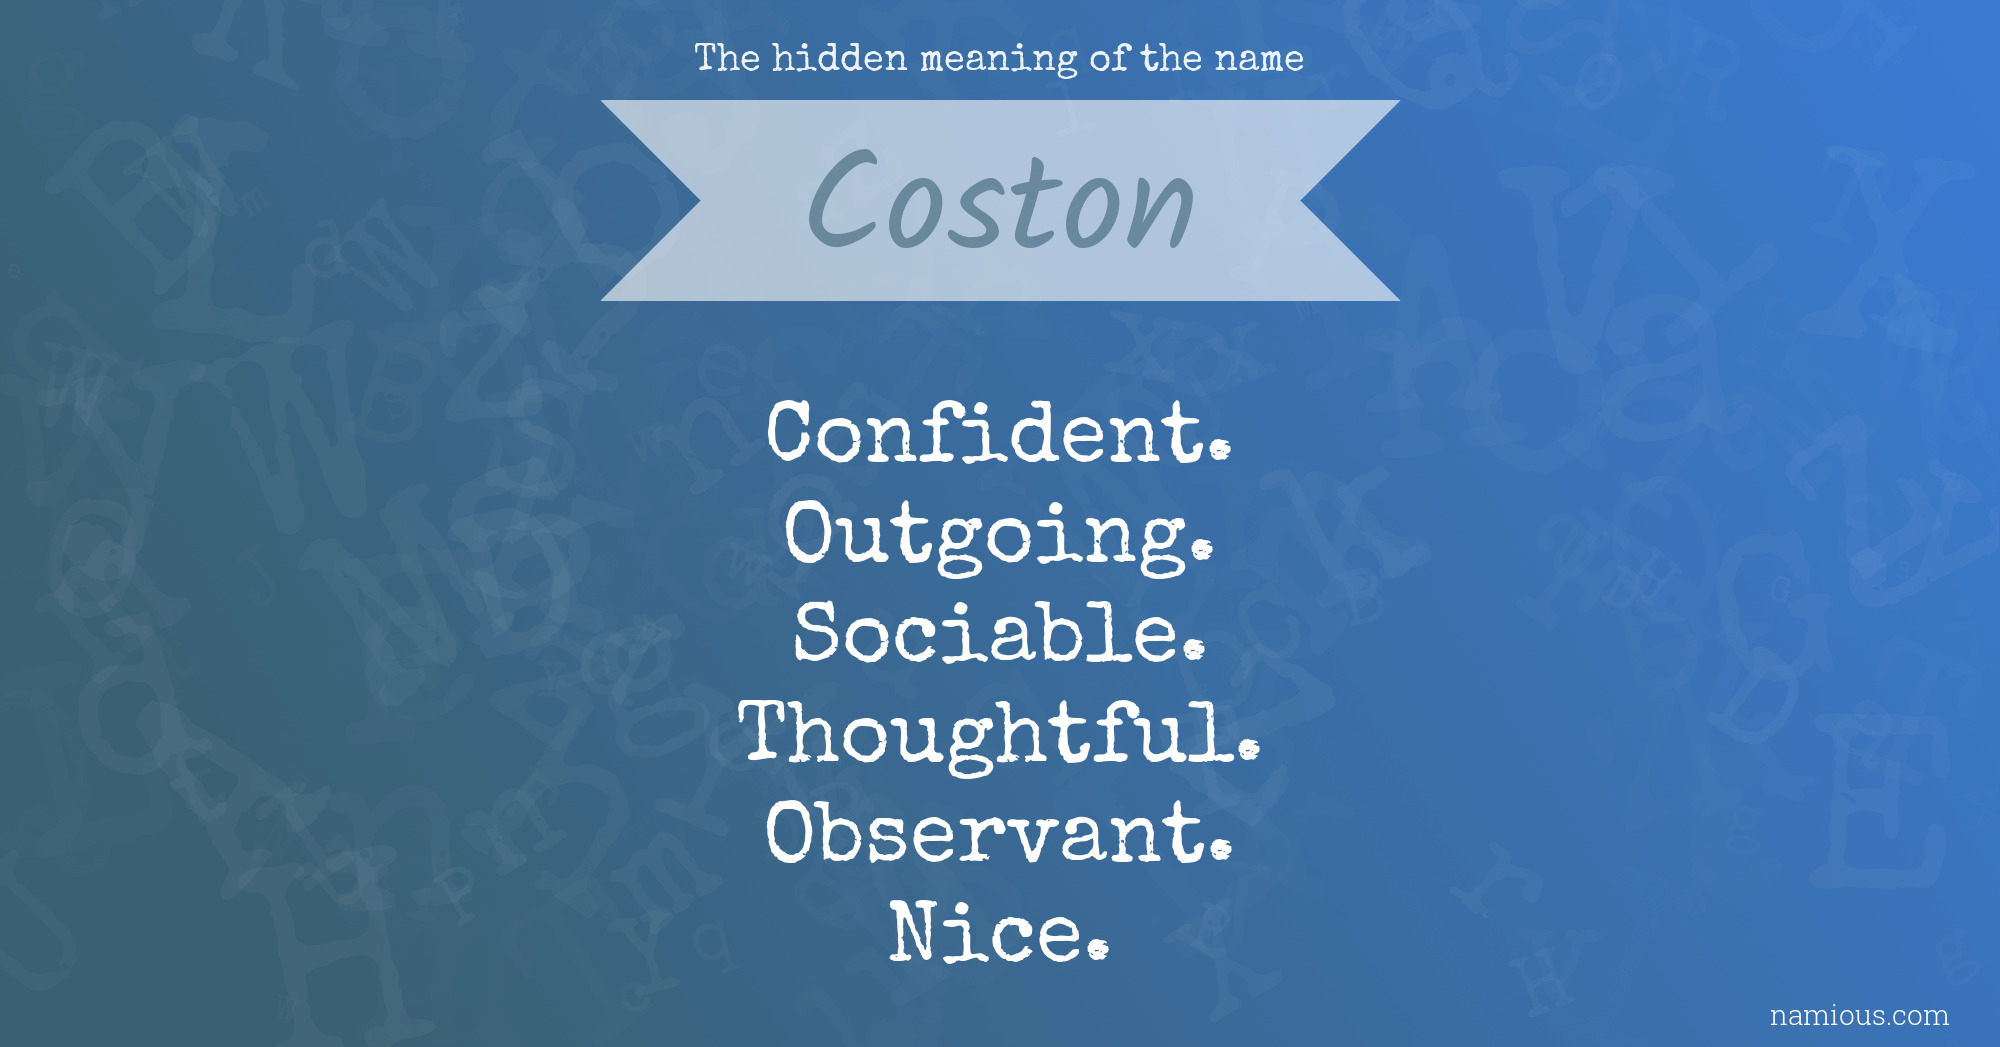 The hidden meaning of the name Coston